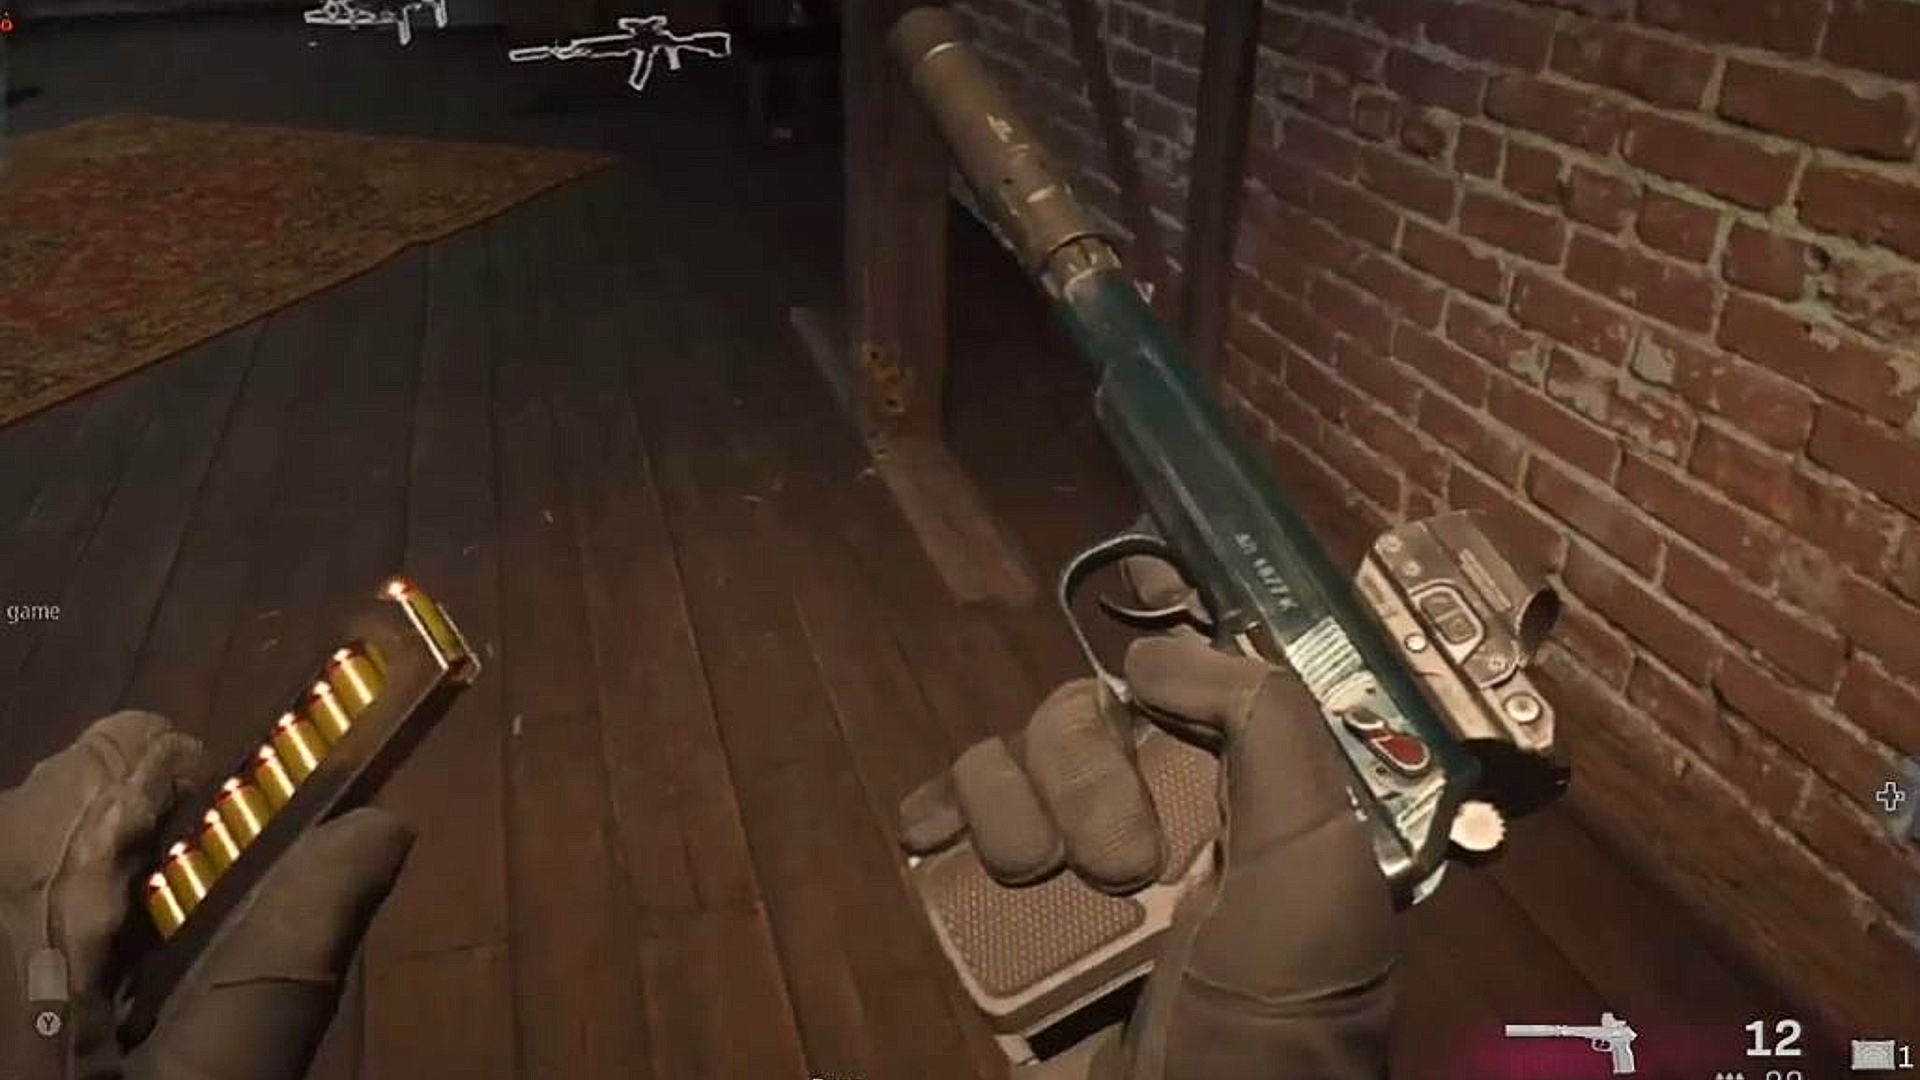 Unreleased Sykov pistol appears in a Call of Duty: Warzone match | The